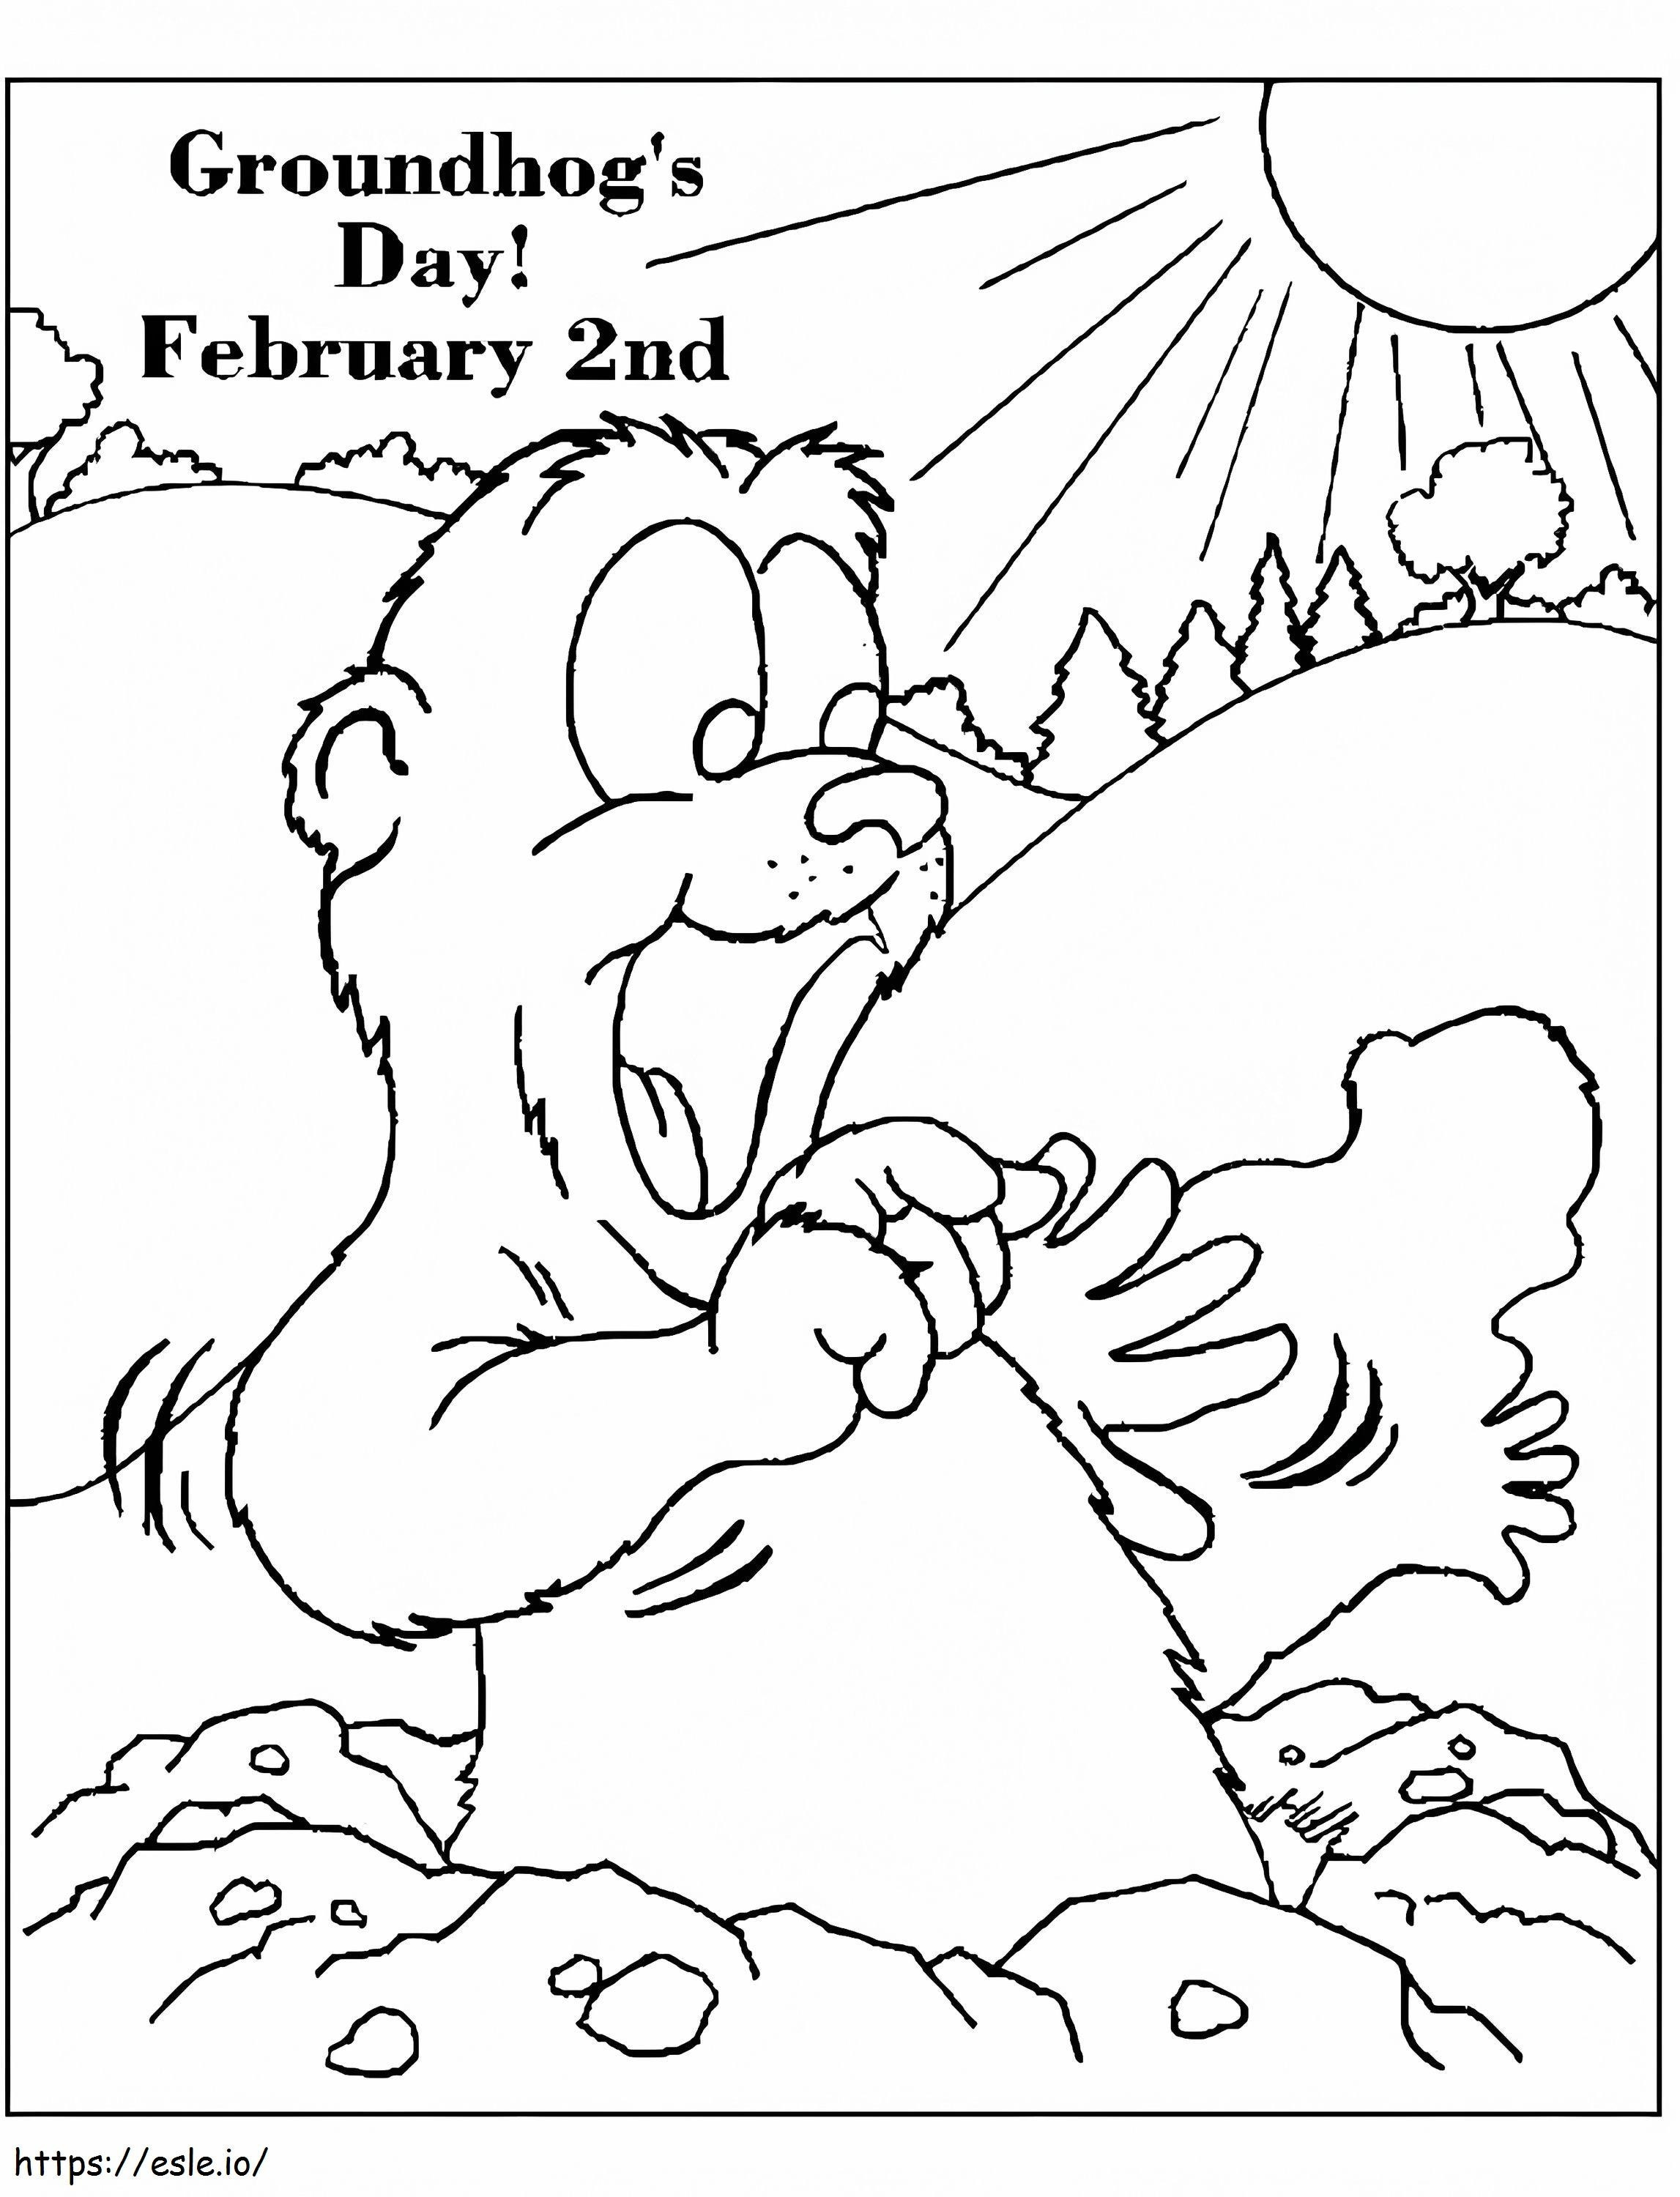 Happy Groundhog Day coloring page